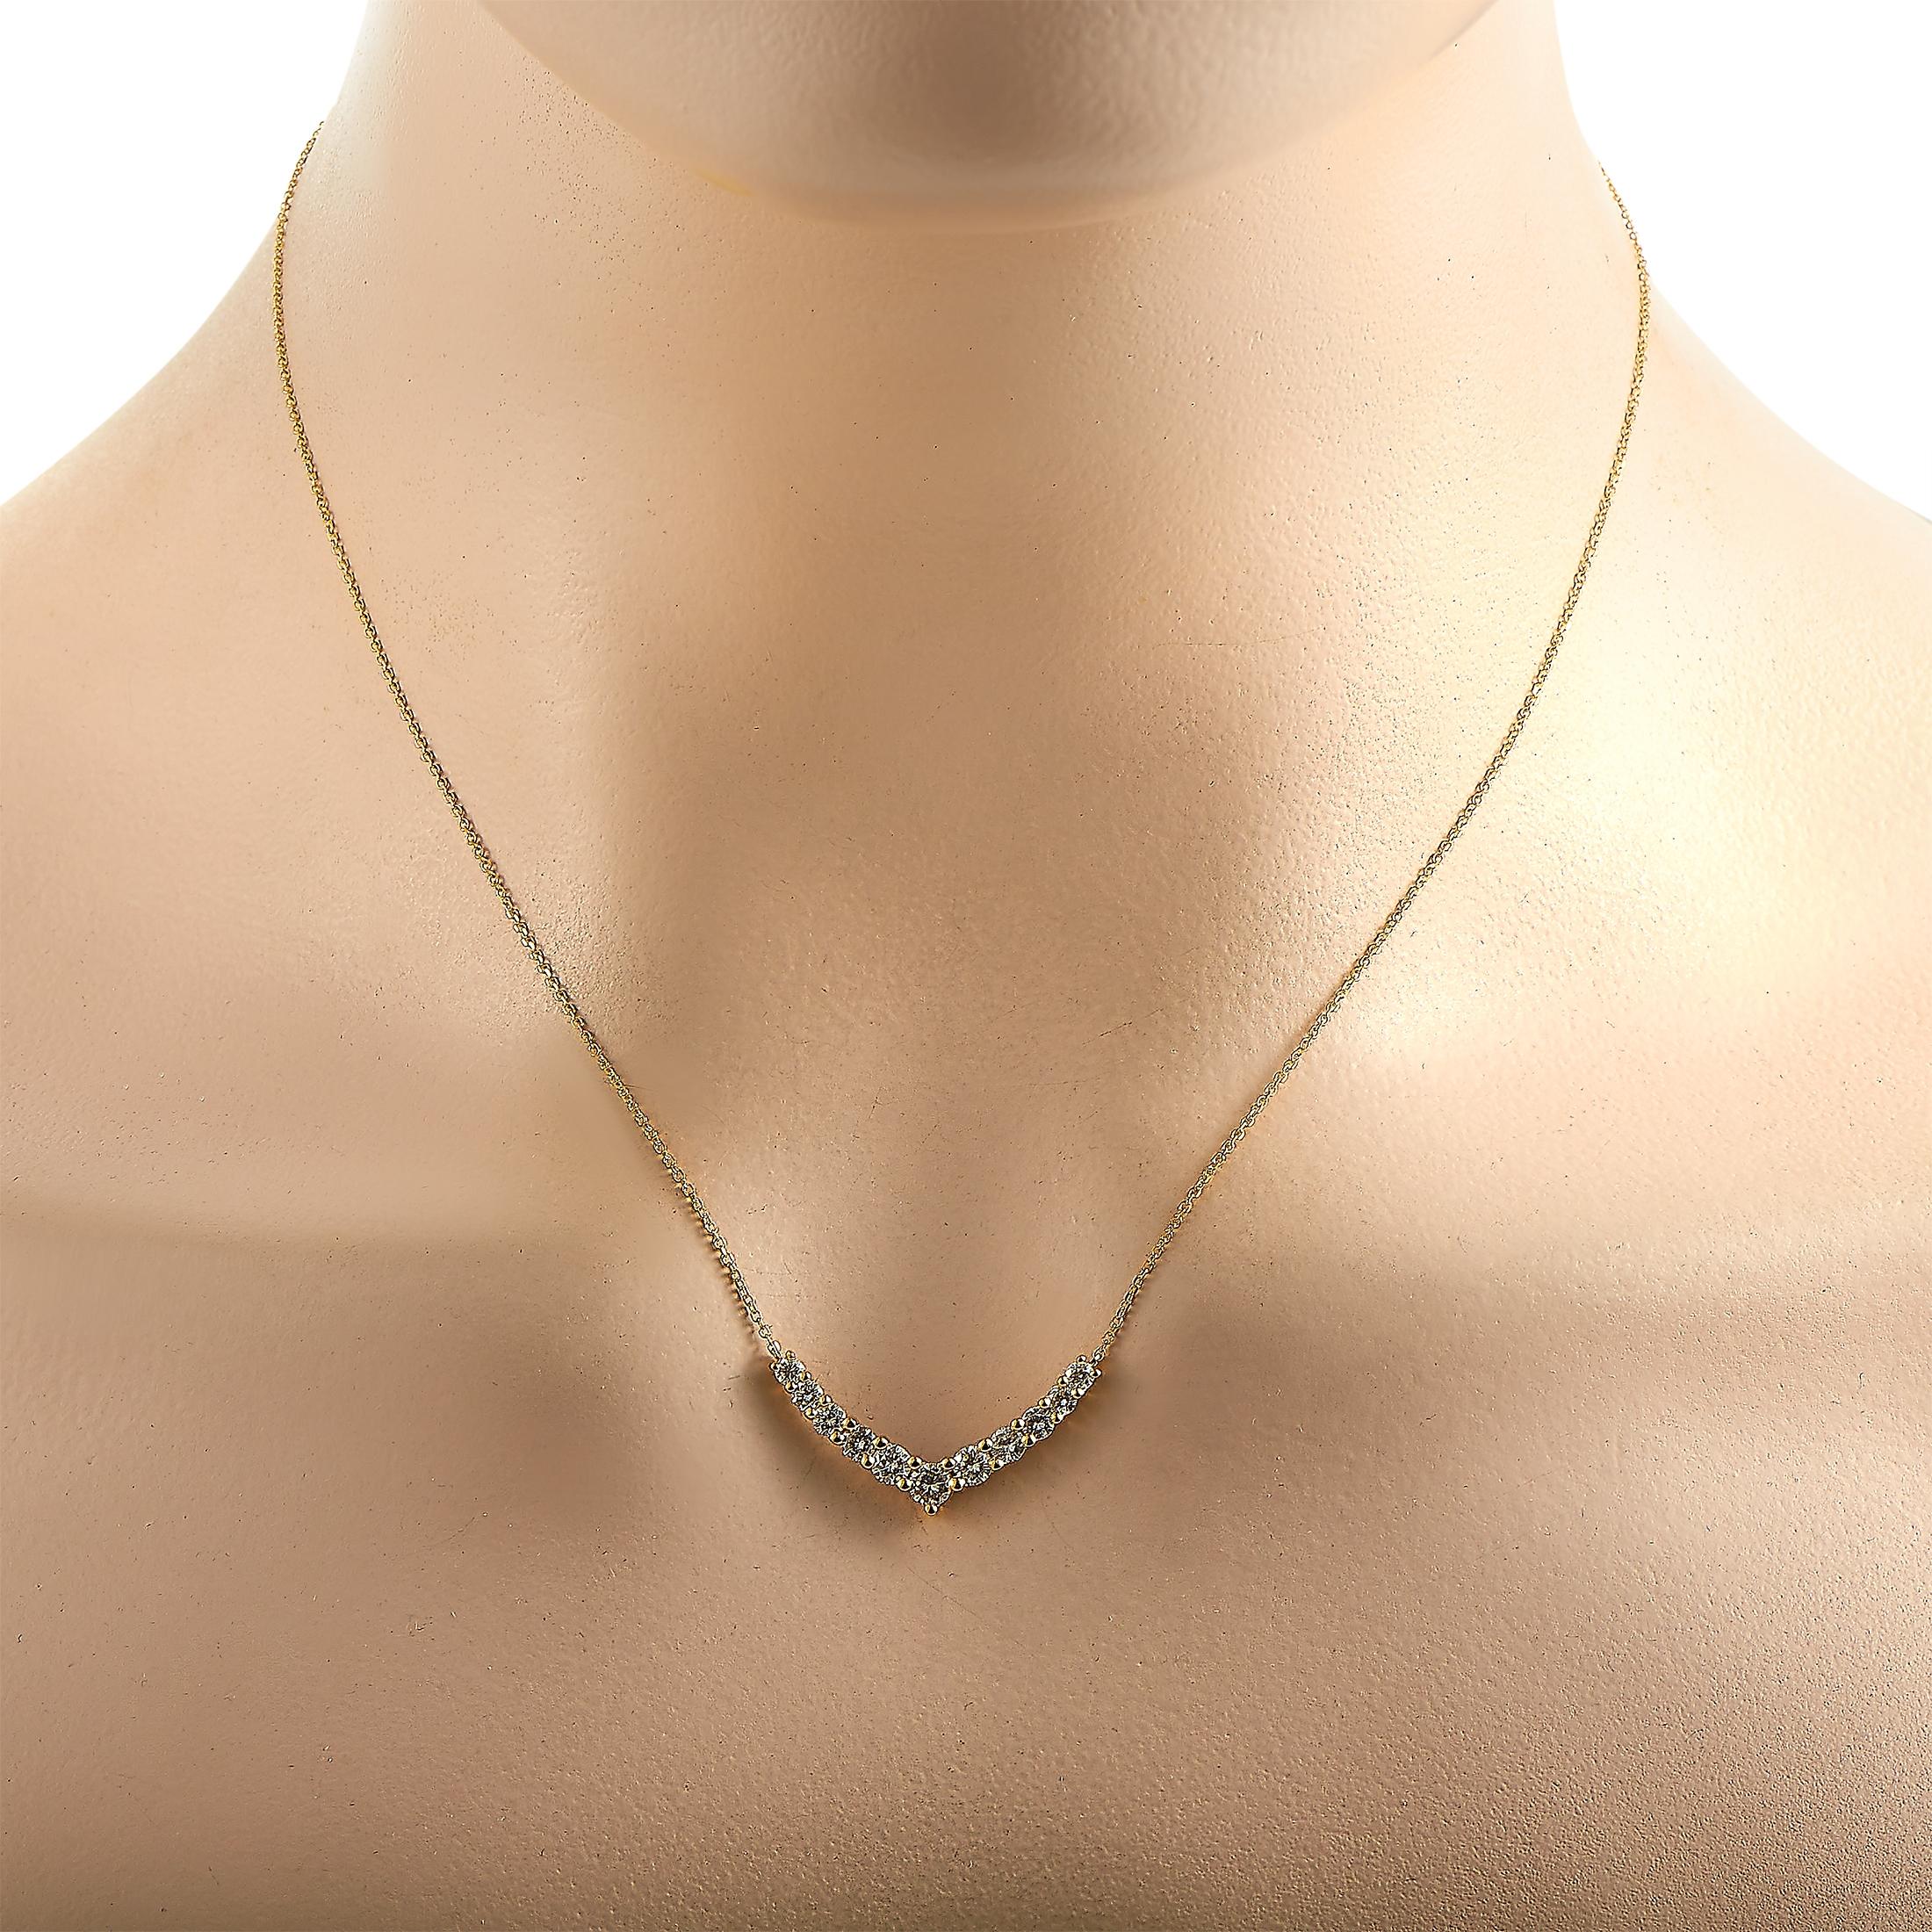 This LB Exclusive necklace is crafted from 18K yellow gold and weighs 3.3 grams. It is presented with a 16” chain and a pendant that measures 0.65” in length and 1” in width. The necklace is embellished with diamonds that total 1.00 carat.
 
